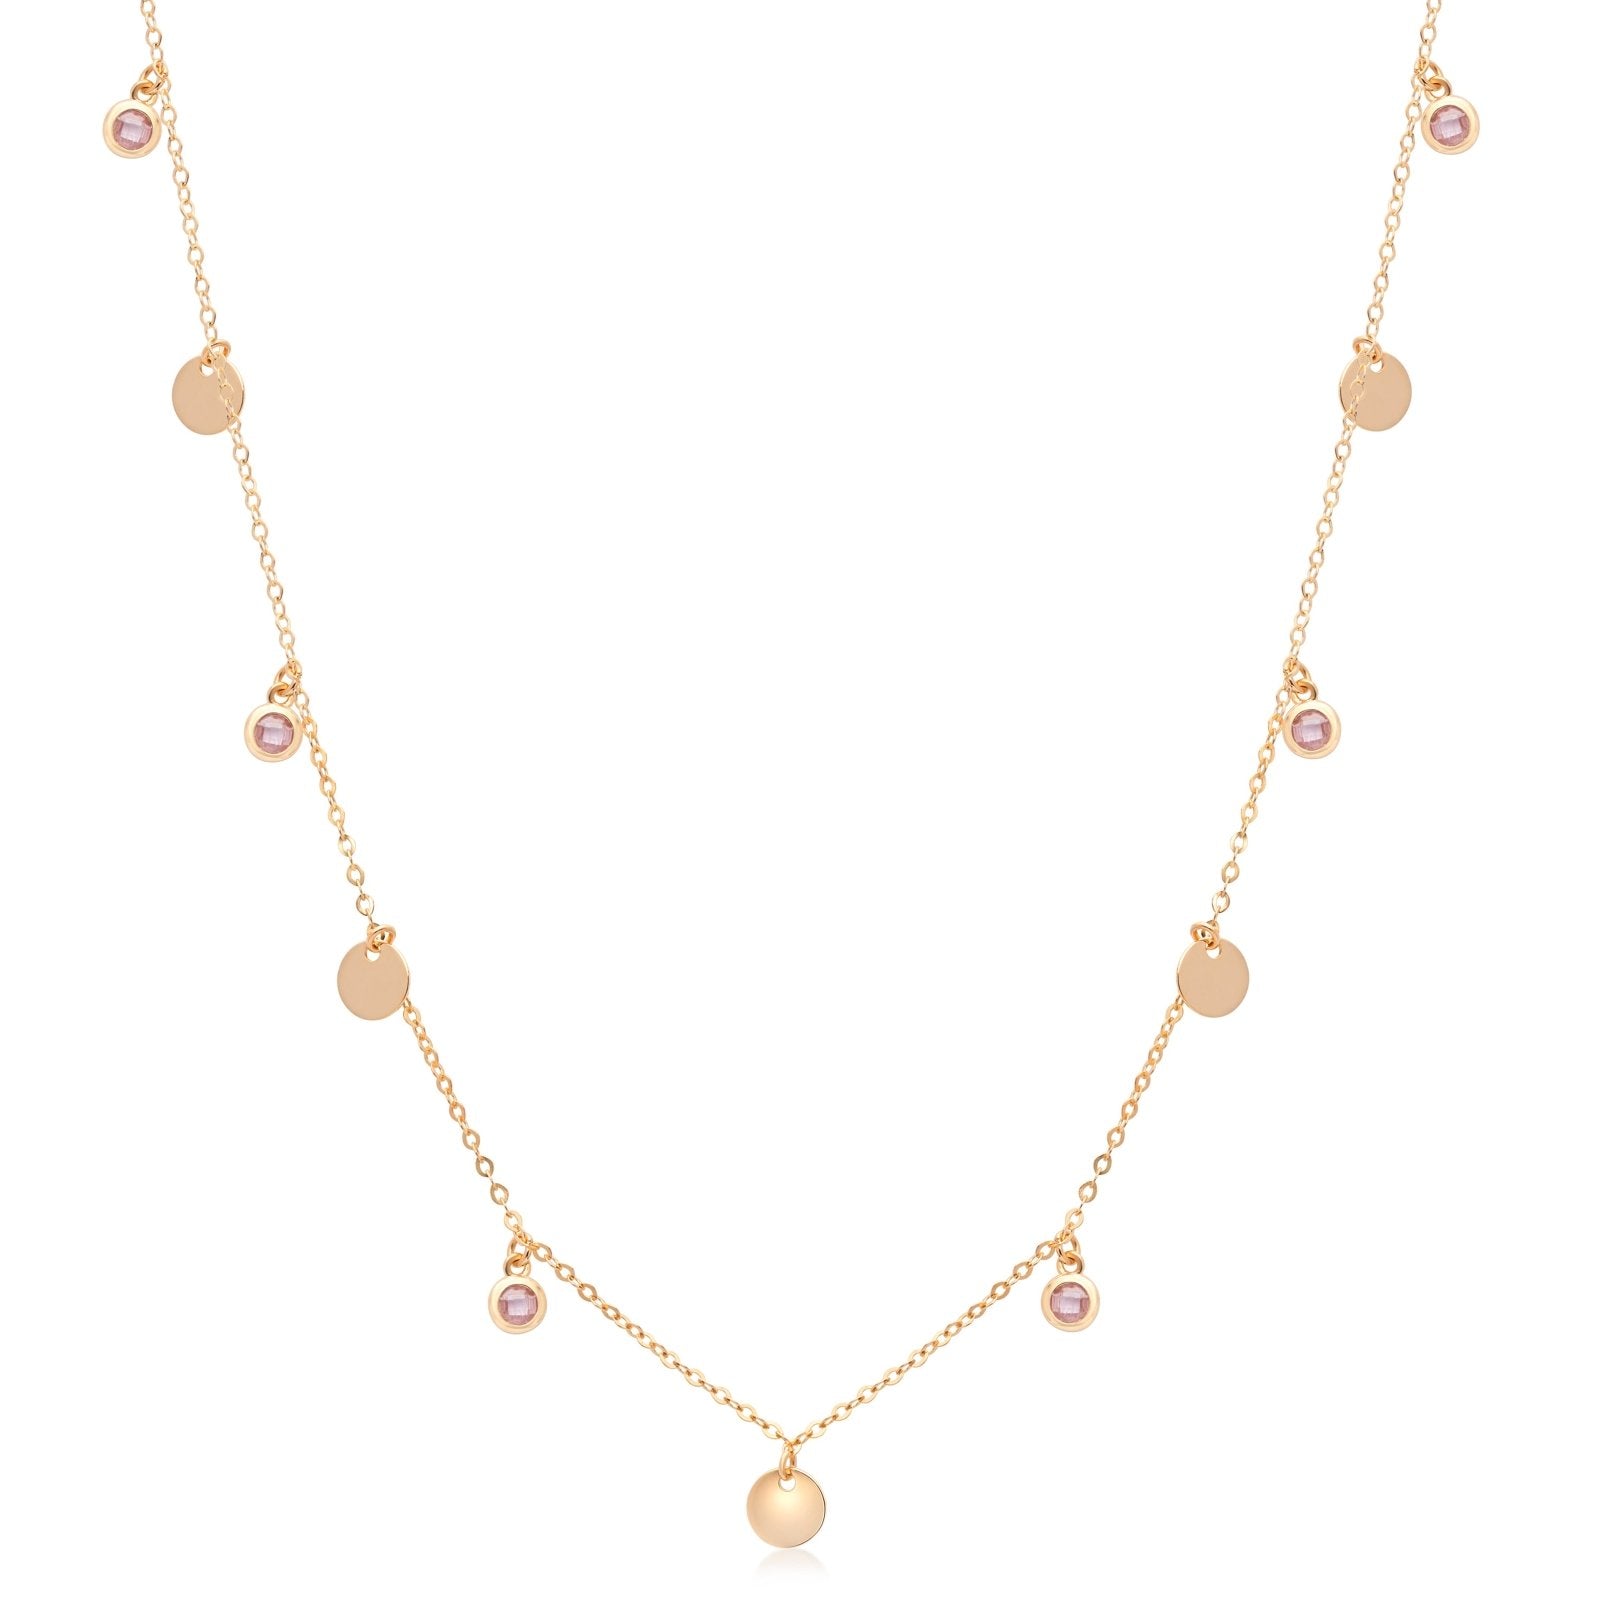 Gold Disc and Pink Tourmaline Drop Station Necklace Bezel Necklaces Estella Collection #product_description# 14k Birthstone Gemstone #tag4# #tag5# #tag6# #tag7# #tag8# #tag9# #tag10#